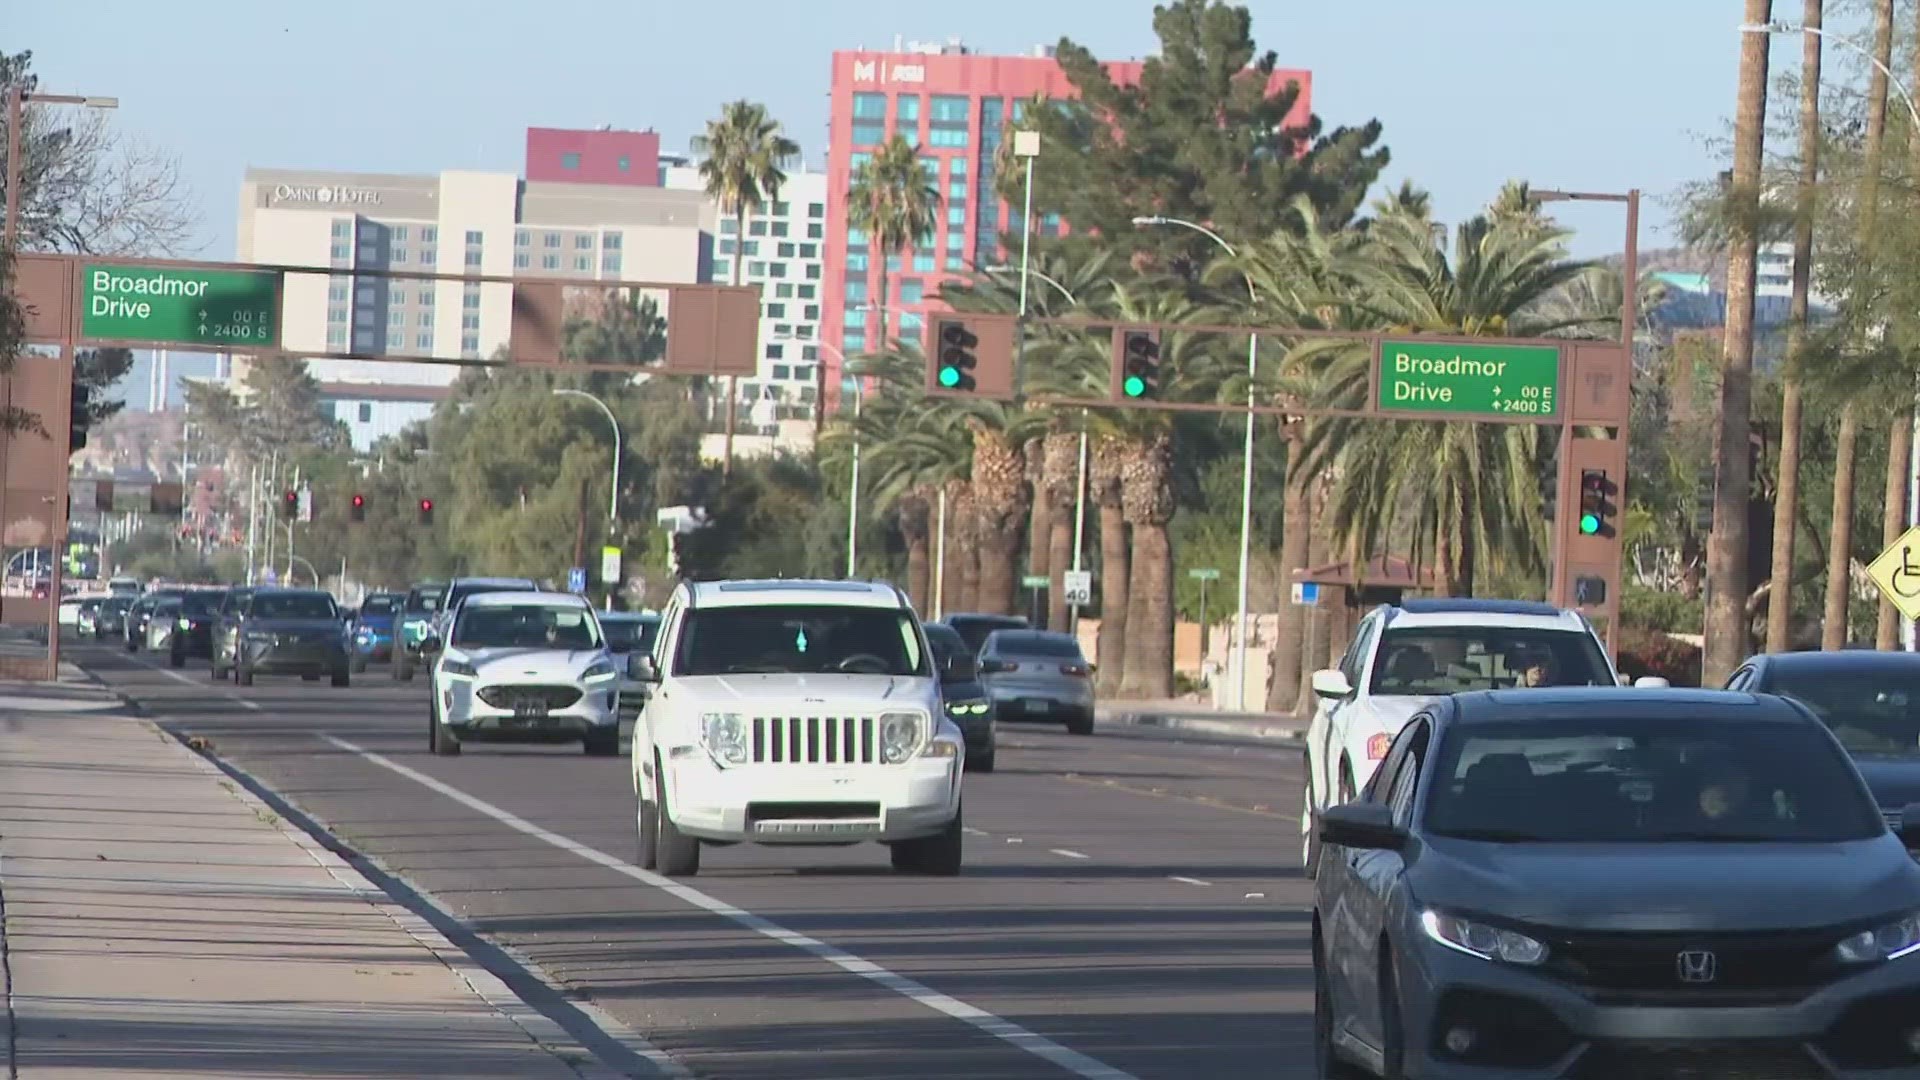 The vice mayor said Tempe will be initiating 'Operation Slow Down' this month.